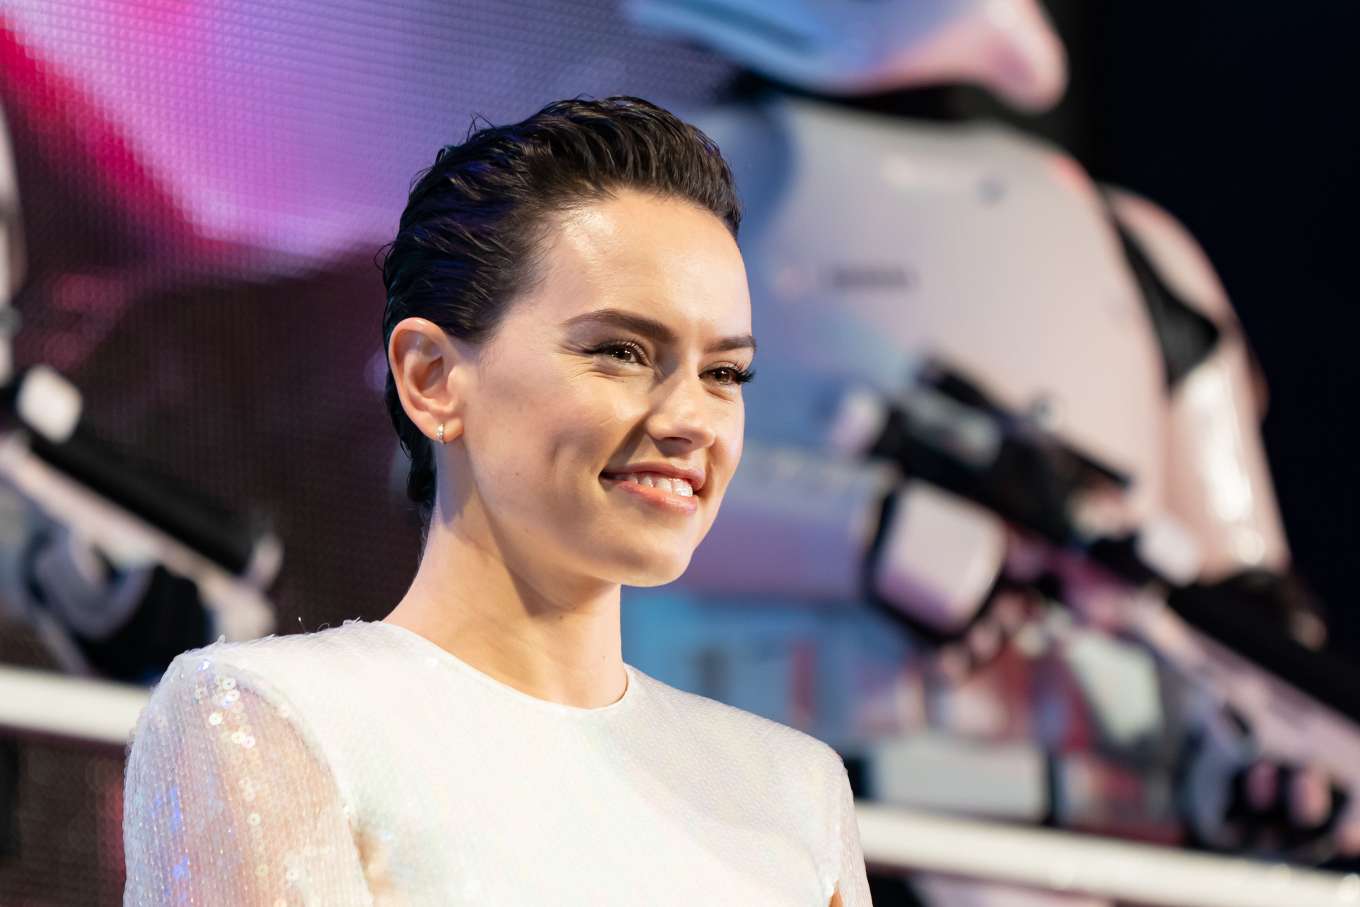 Daisy Ridley 2019 : Daisy Ridley - Star Wars: The Rise of Skywalker Special...